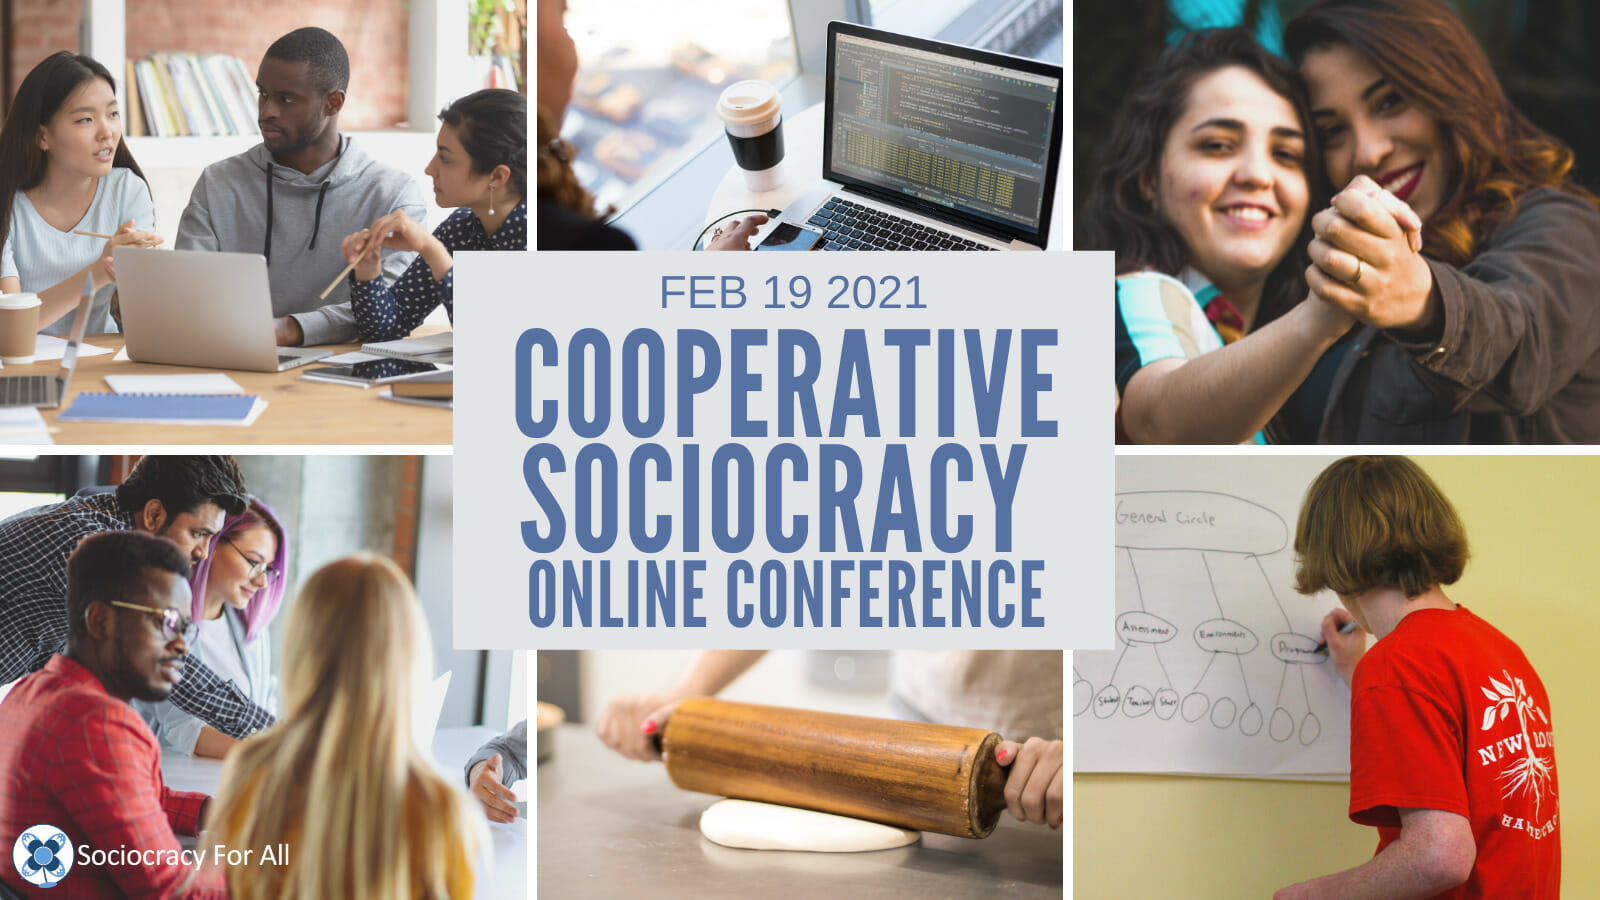 call for workshop proposals - sociocracy business - Sociocracy For All